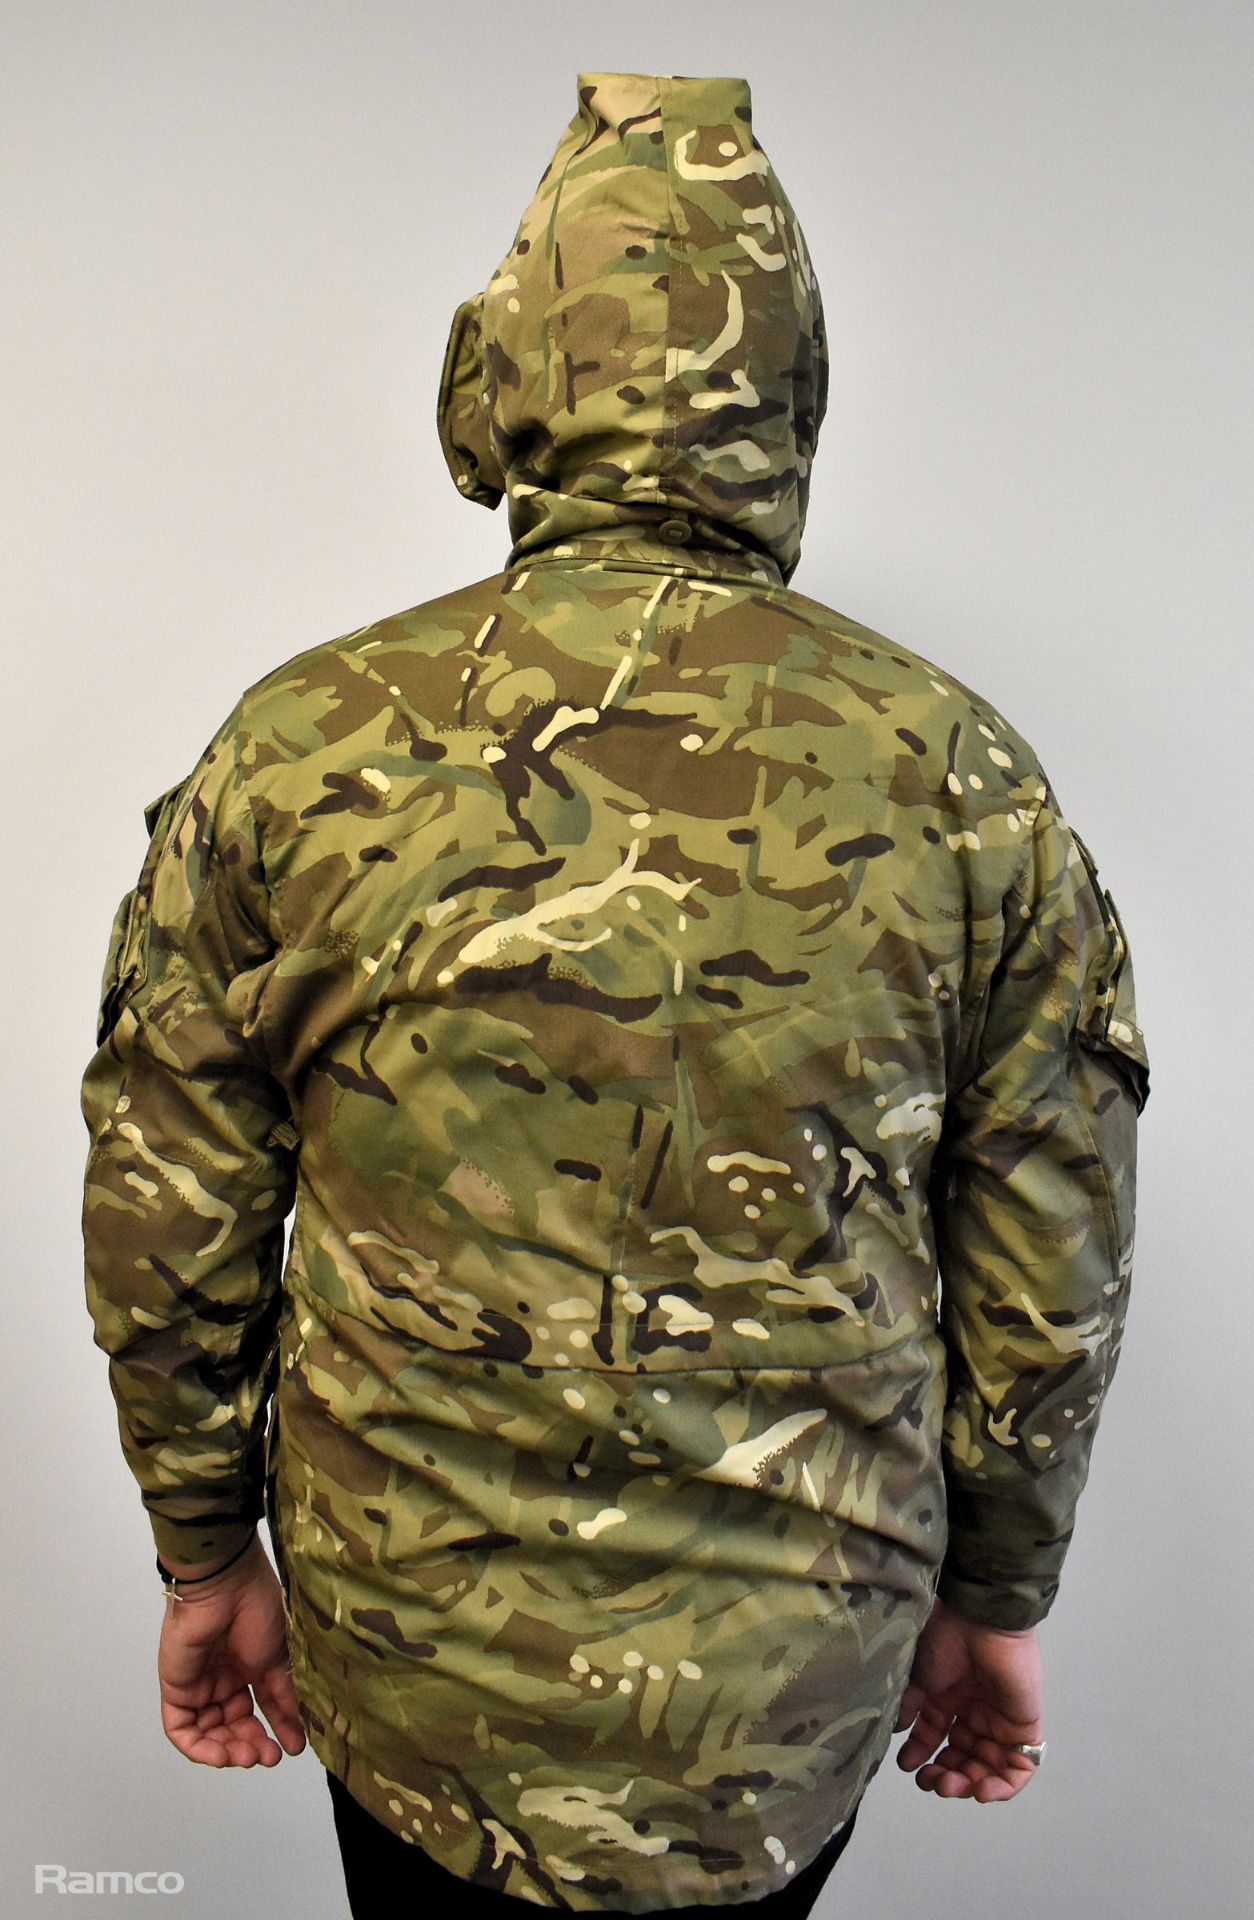 40x British Army MTP combat smocks 2 windproof - mixed grades and sizes - Image 6 of 12